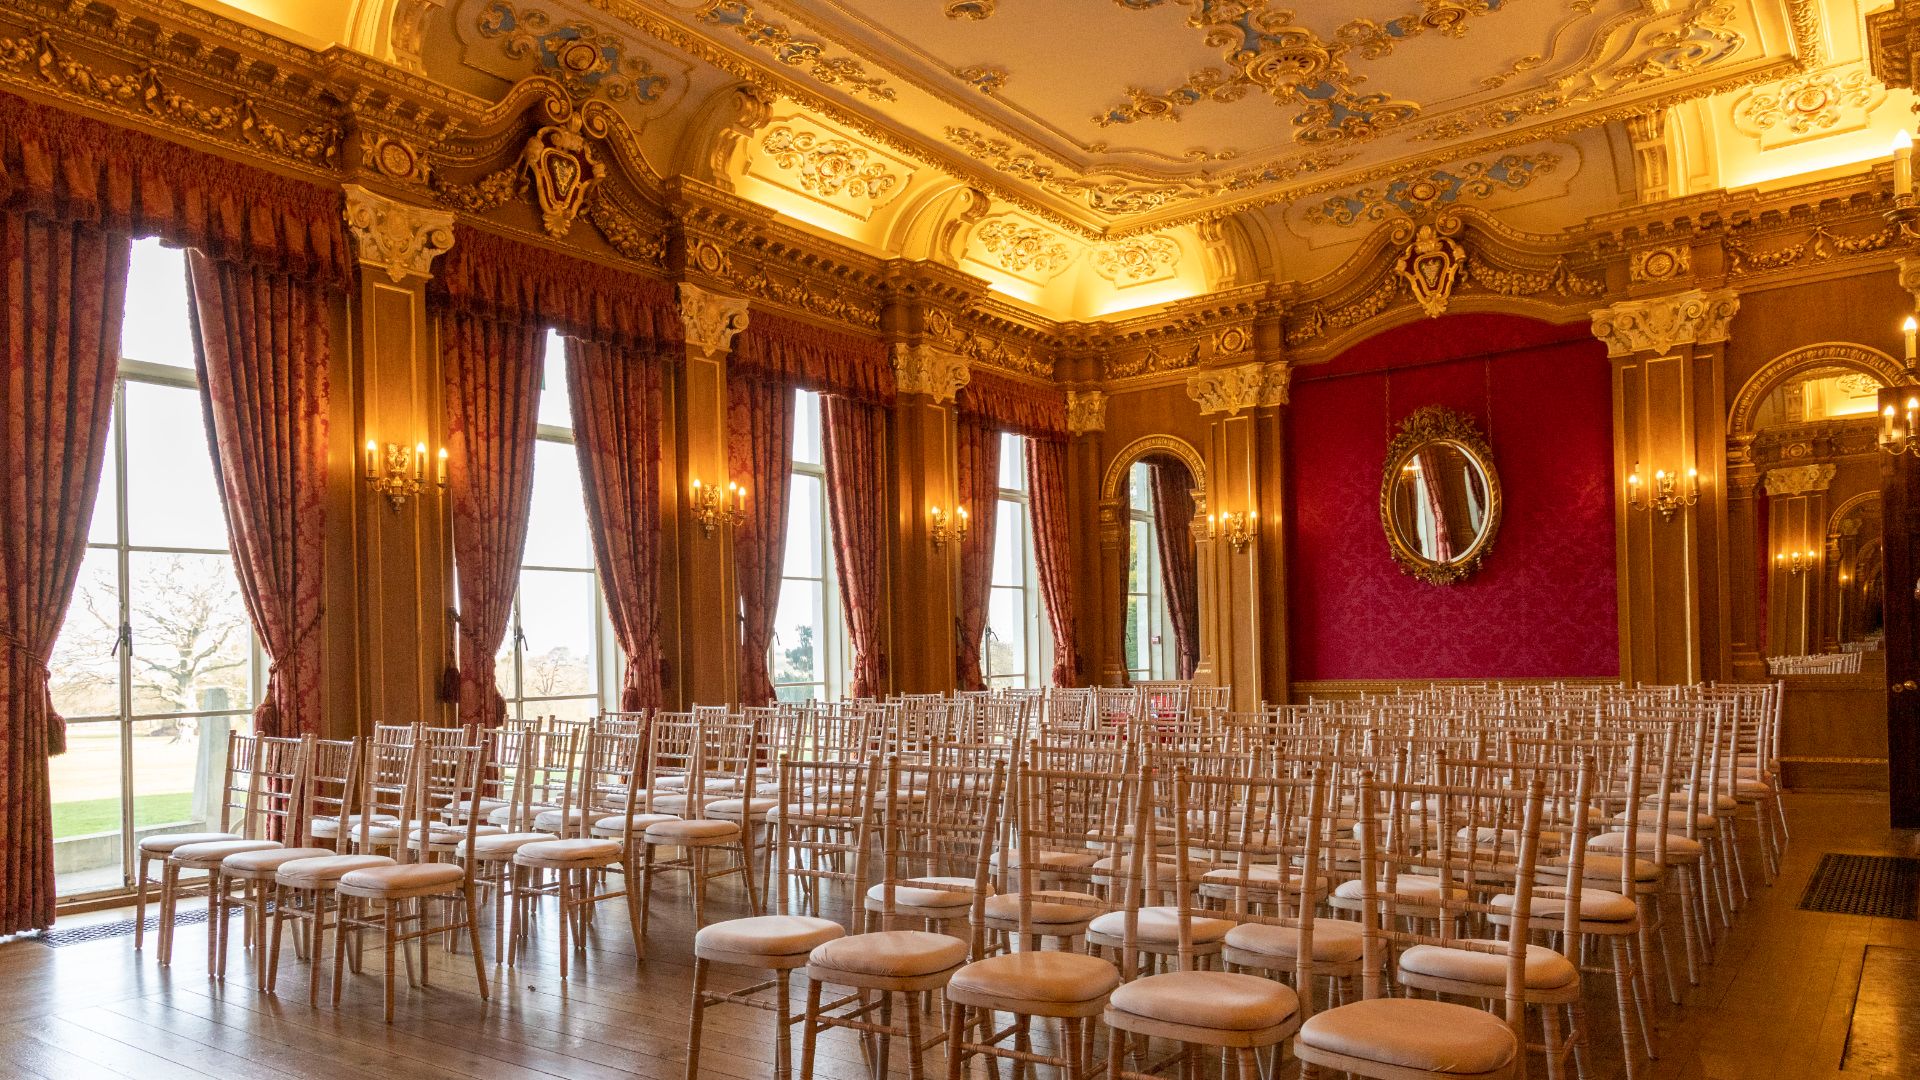 The Banqueting Room set out for a wedding ceremony